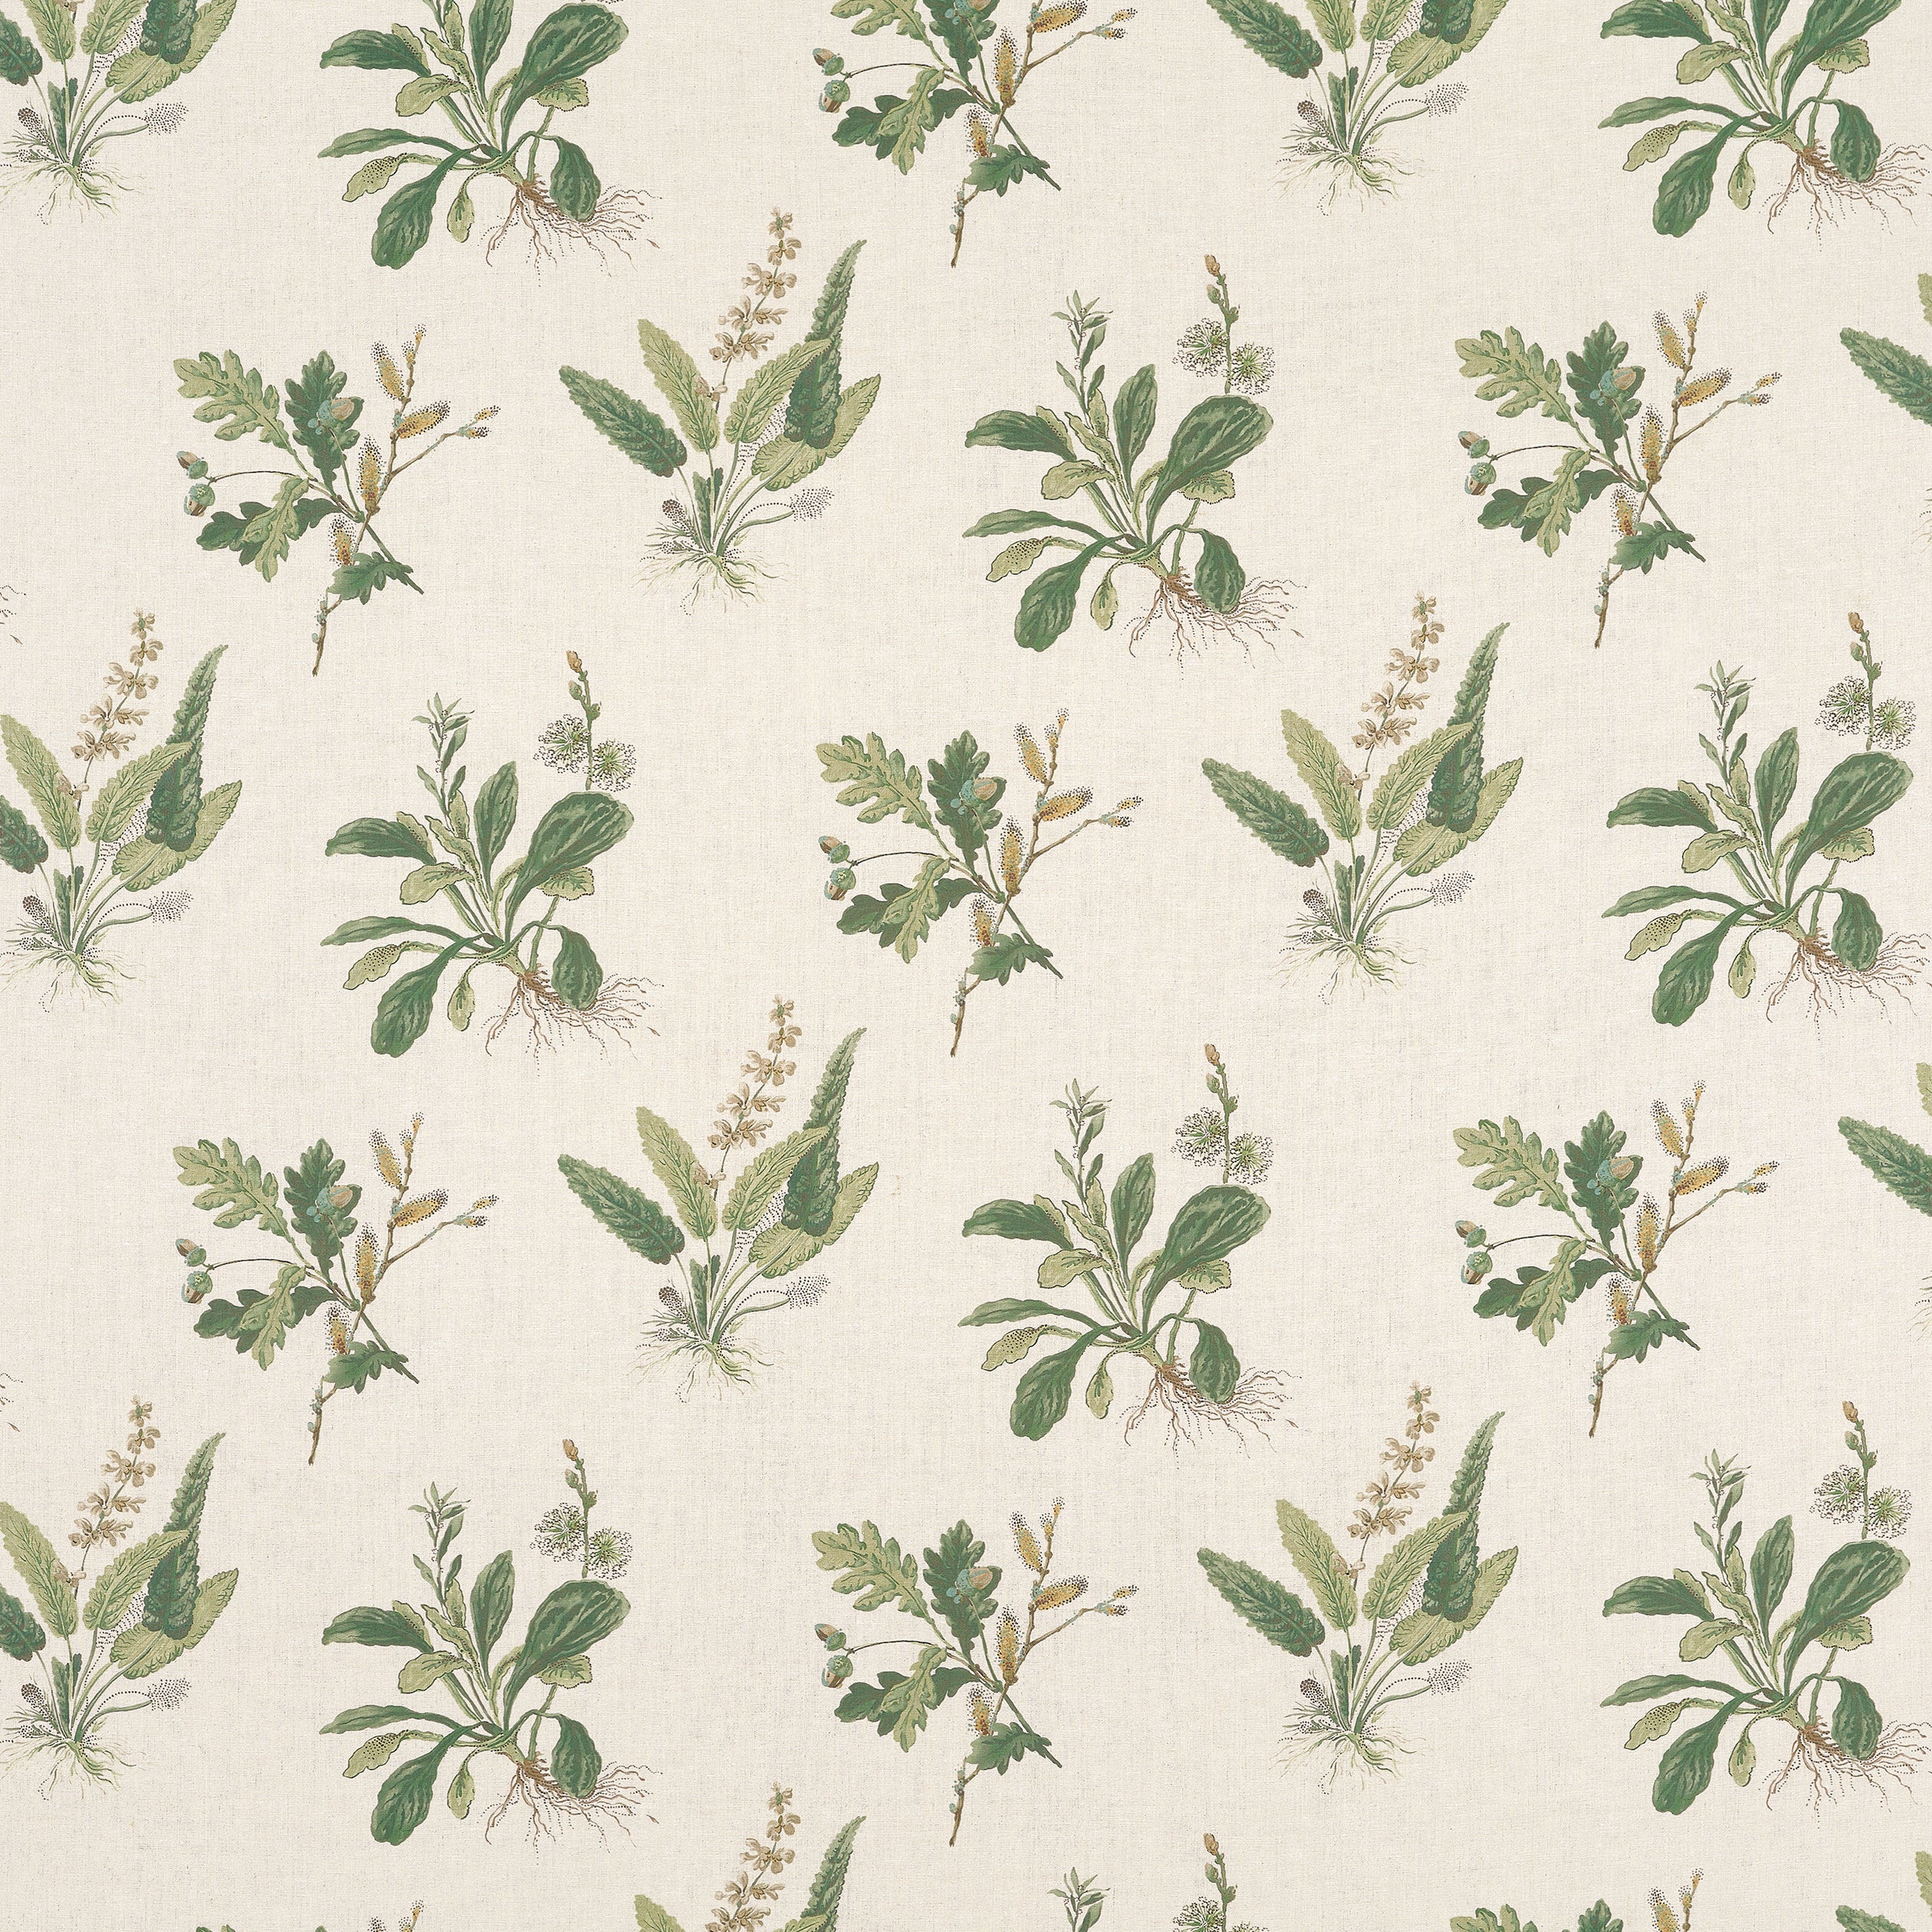 Woodland fabric in green on natural color - pattern number AF57853 - by Anna French in the Bristol collection